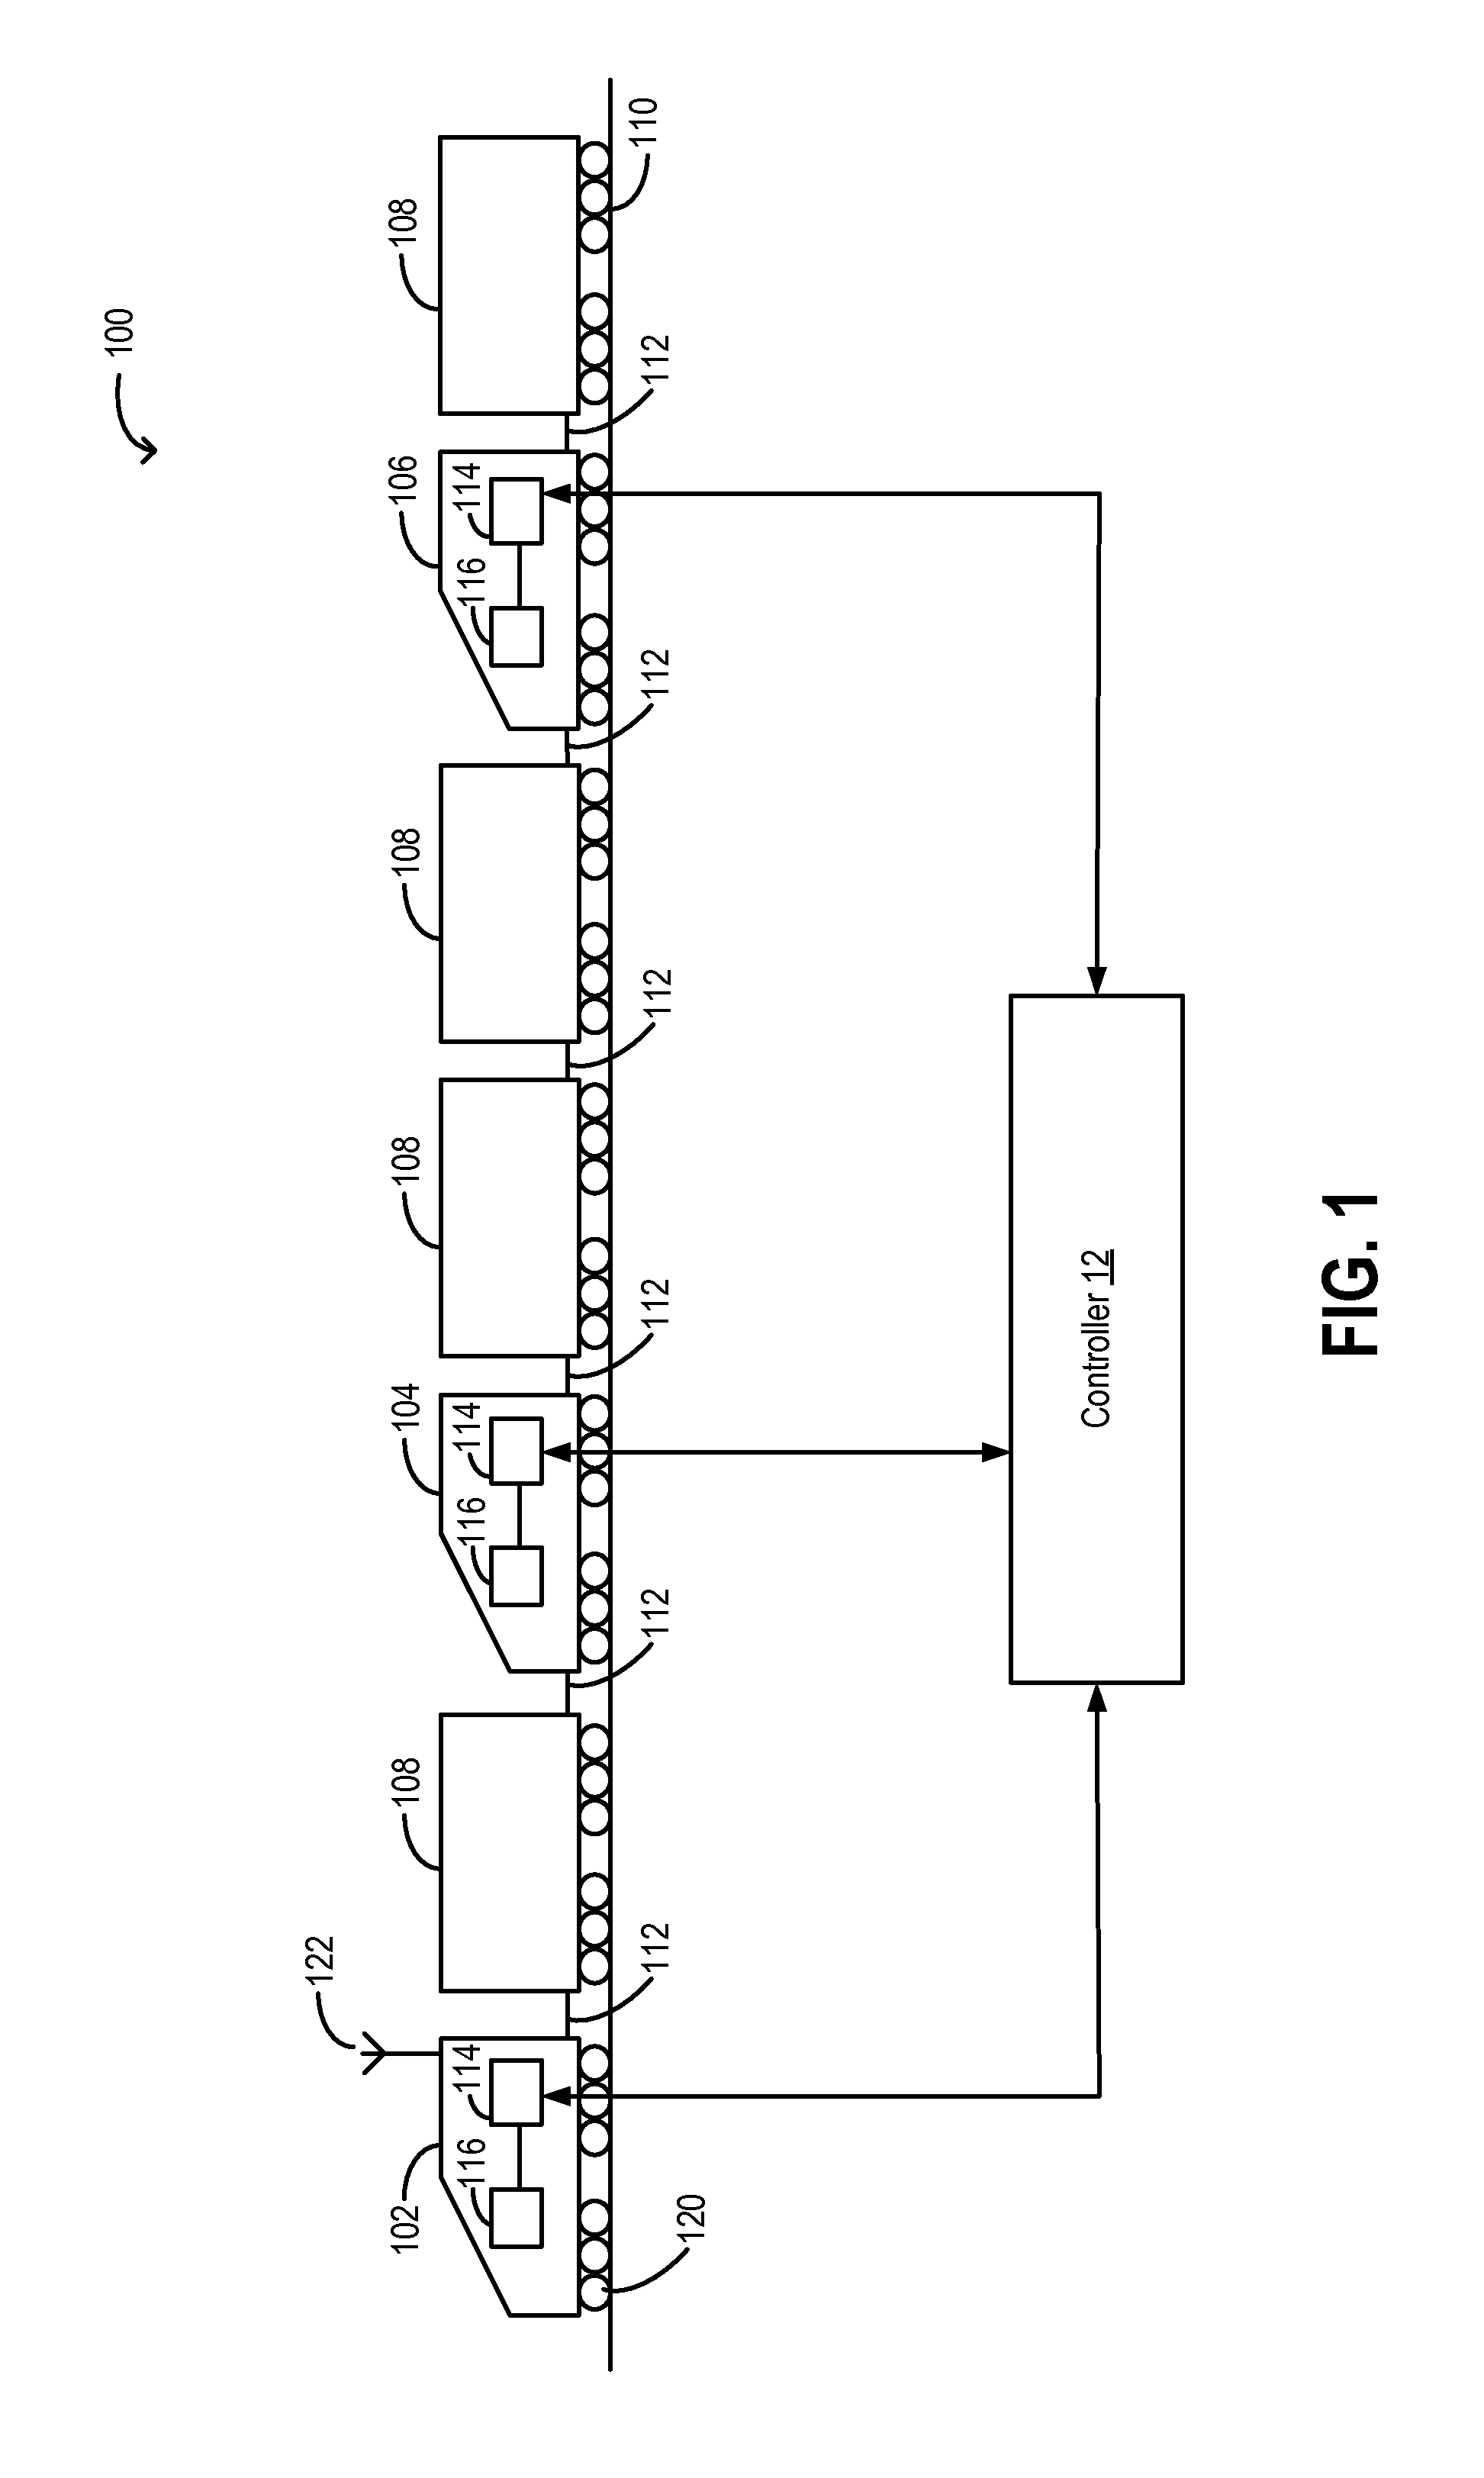 Method and system for rail vehicle reconfiguration